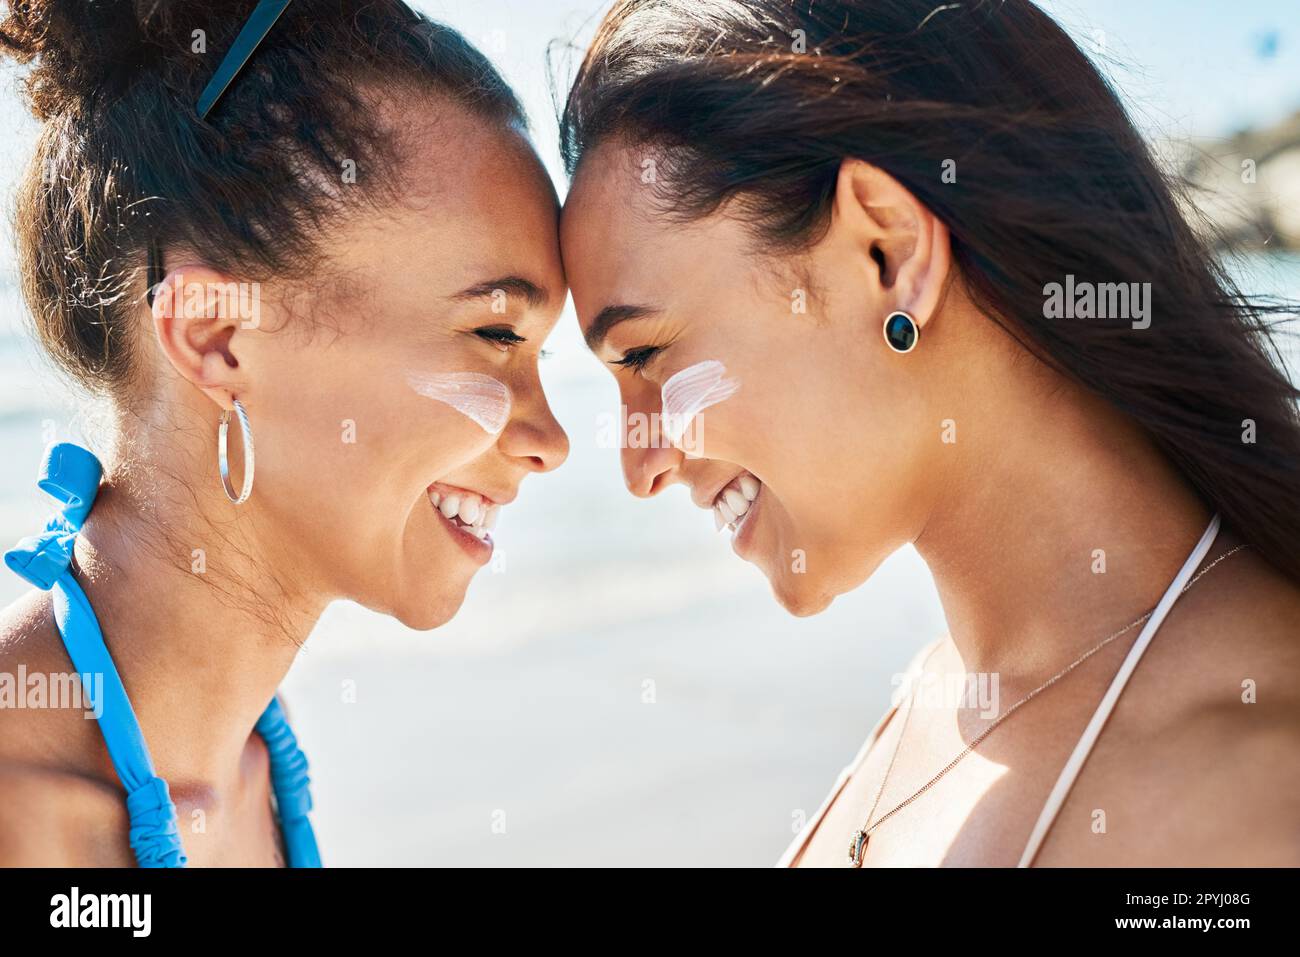 UV got a friend in me. two beautiful young women at the beach with sunscreen on their faces smiling at each other. Stock Photo